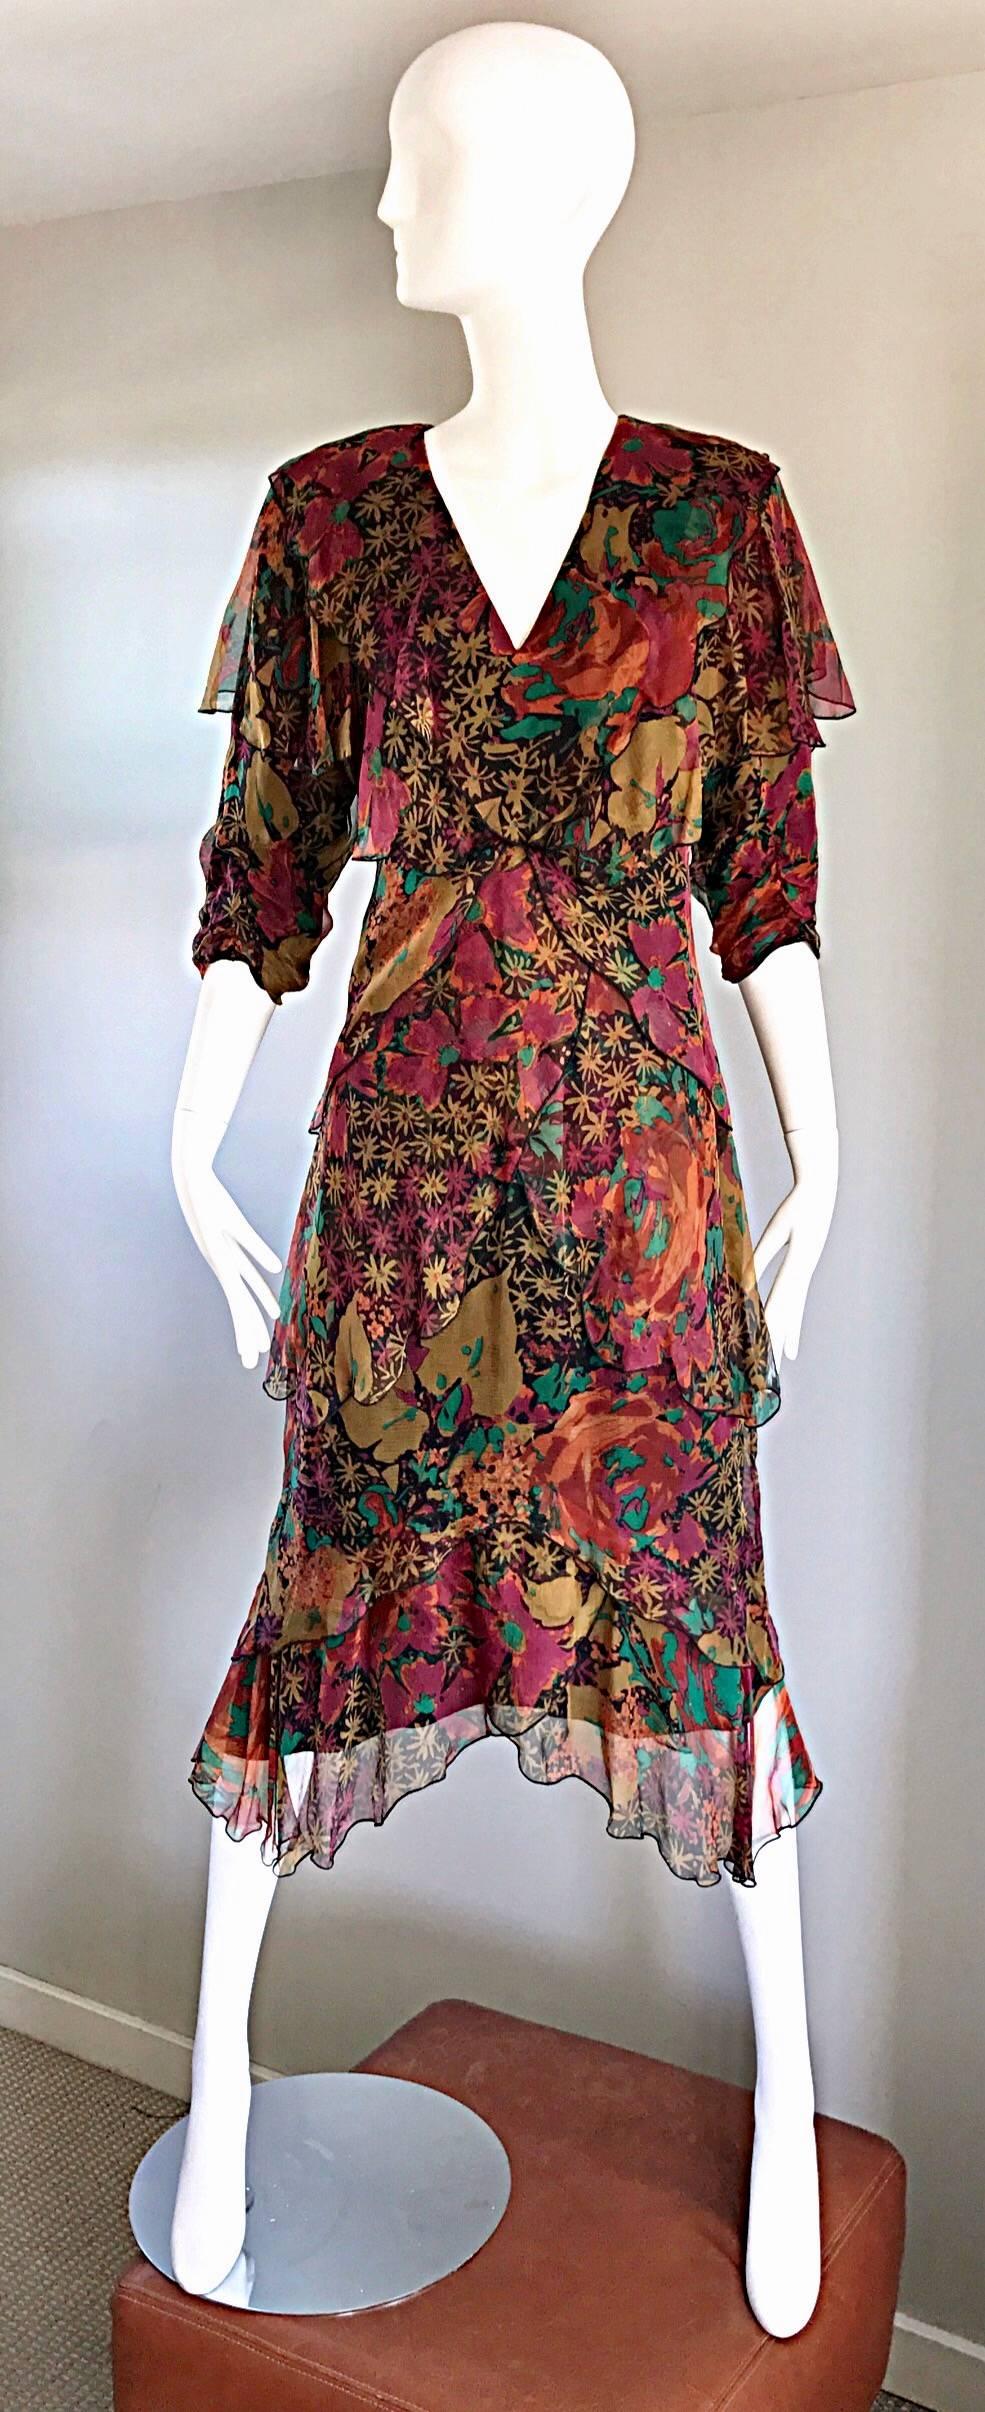 Beautiful vintage HOLLY'S HARP for Saks FIfth Avenue boho silk chiffon asymmetrical dress! Warm vibrant autumnal tones, with wonderful flower prints throughout. Signature Holly's Harp style, with flattering layers throughout. 3/4 sleeves feature